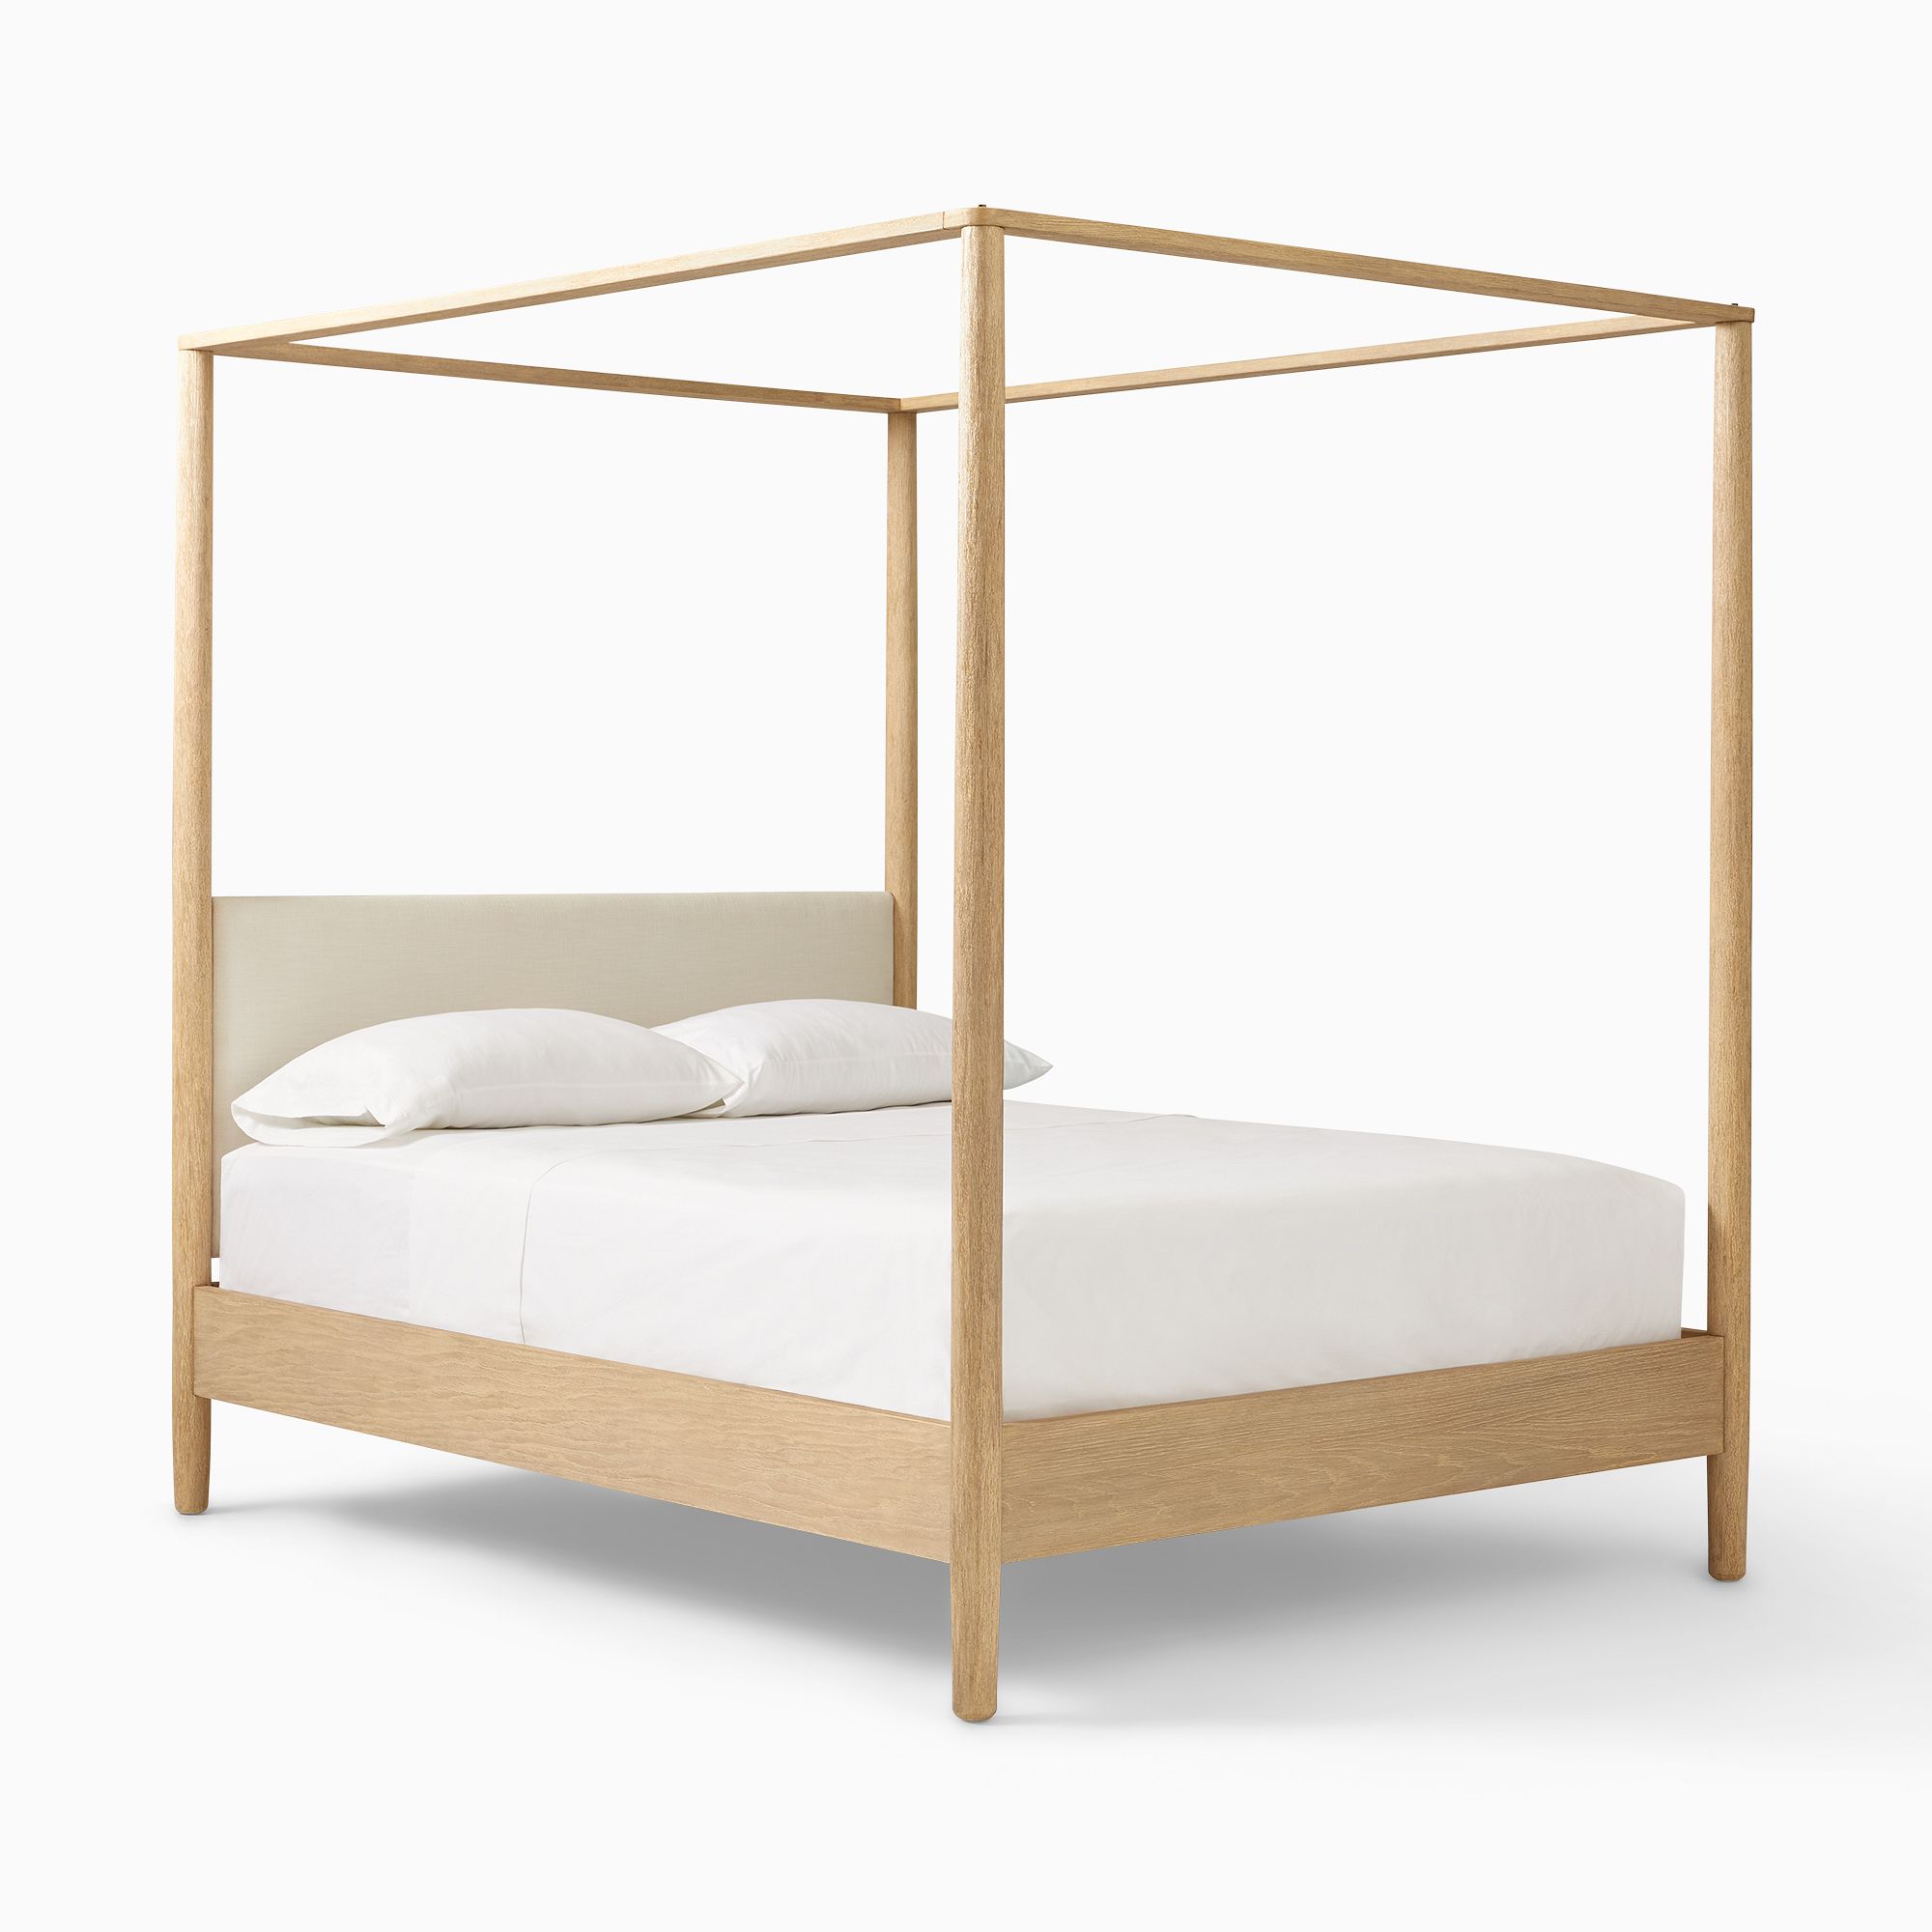 Hargrove Canopy Bed | West Elm